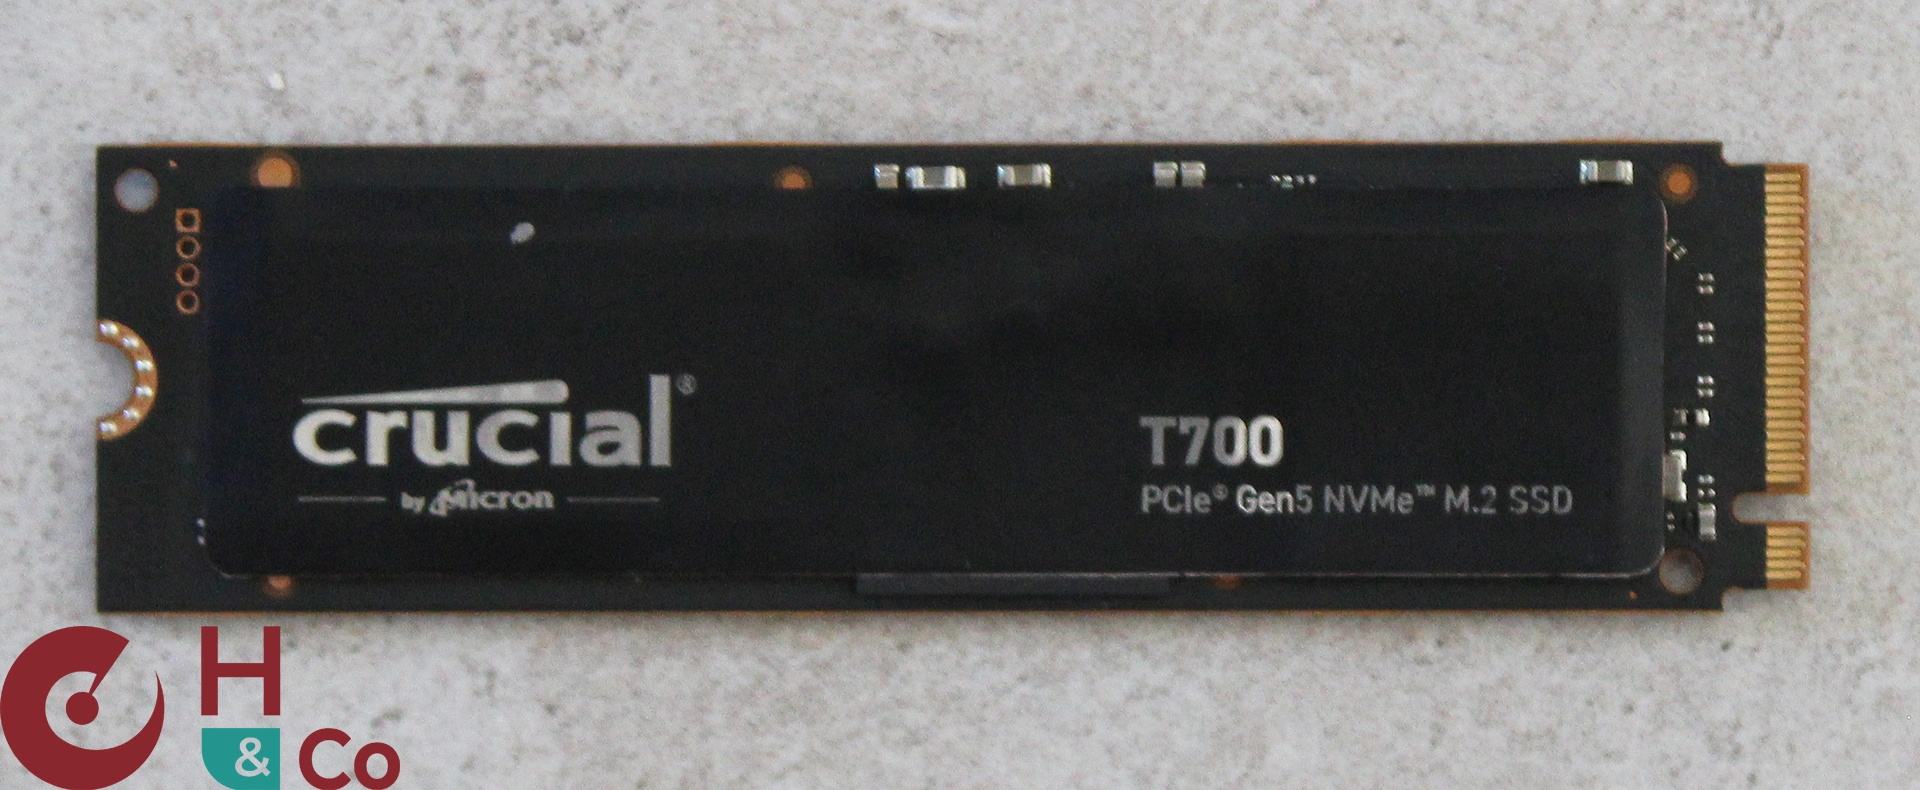 Crucial T700 Recto